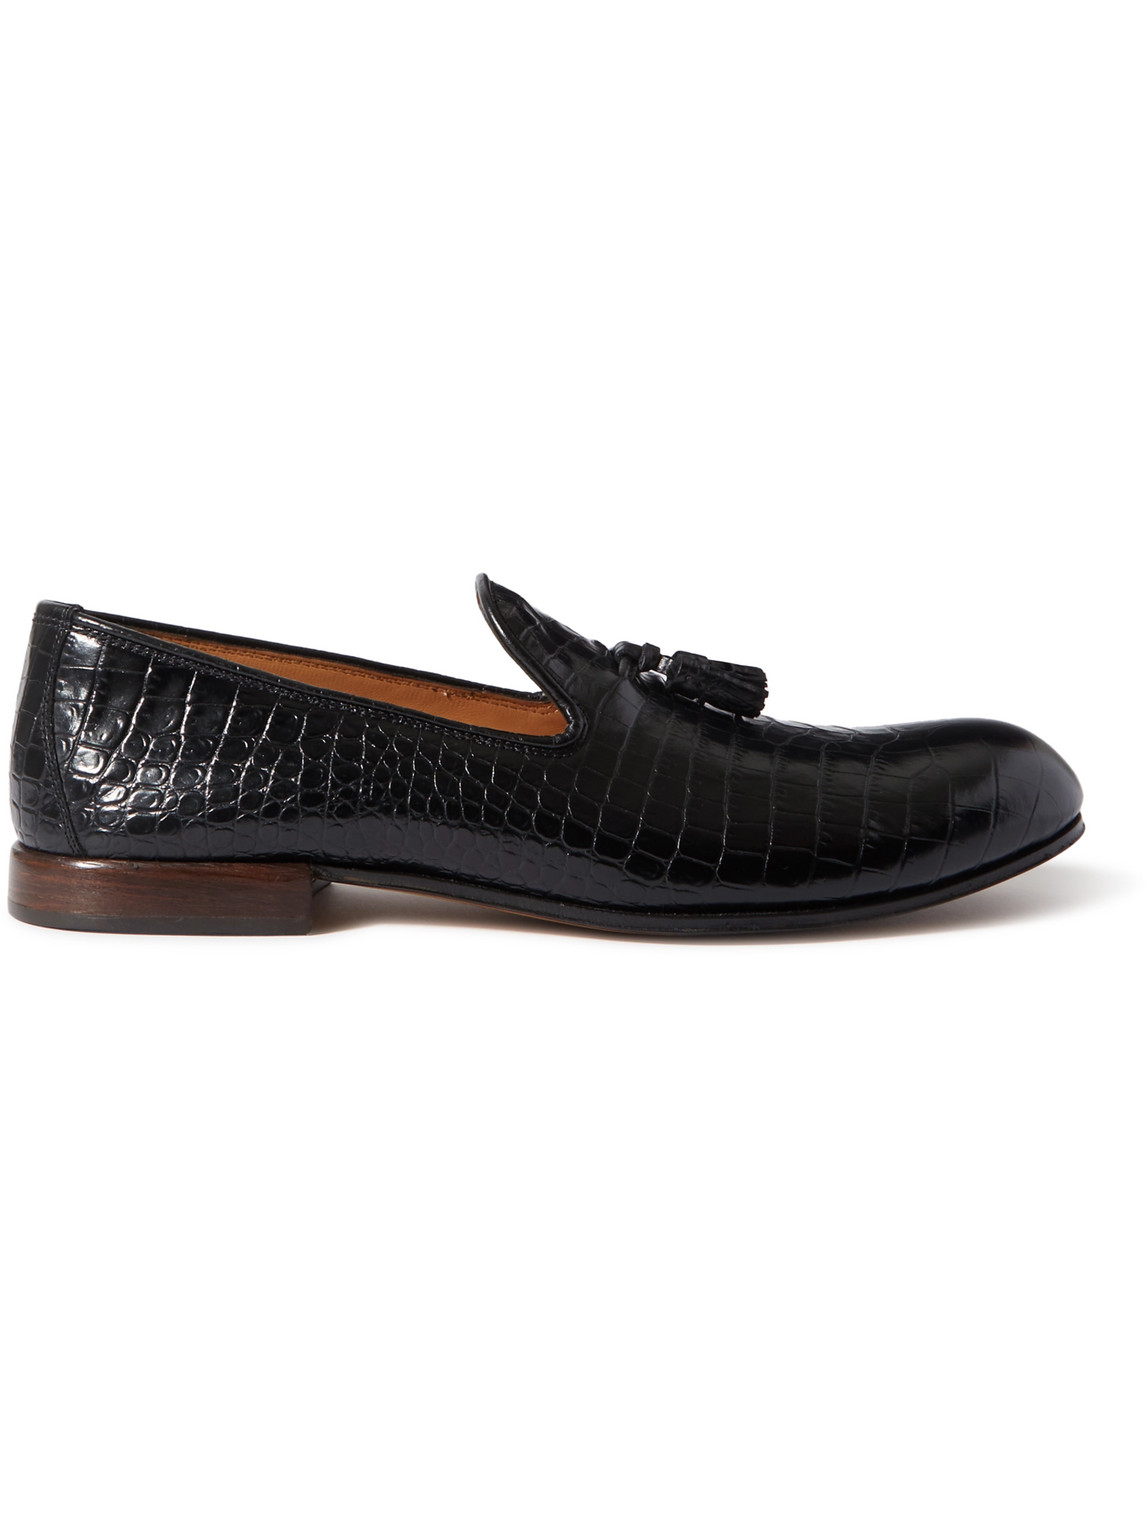 TOM FORD NICOLAS CROC-EFFECT LEATHER TASSELLED LOAFERS